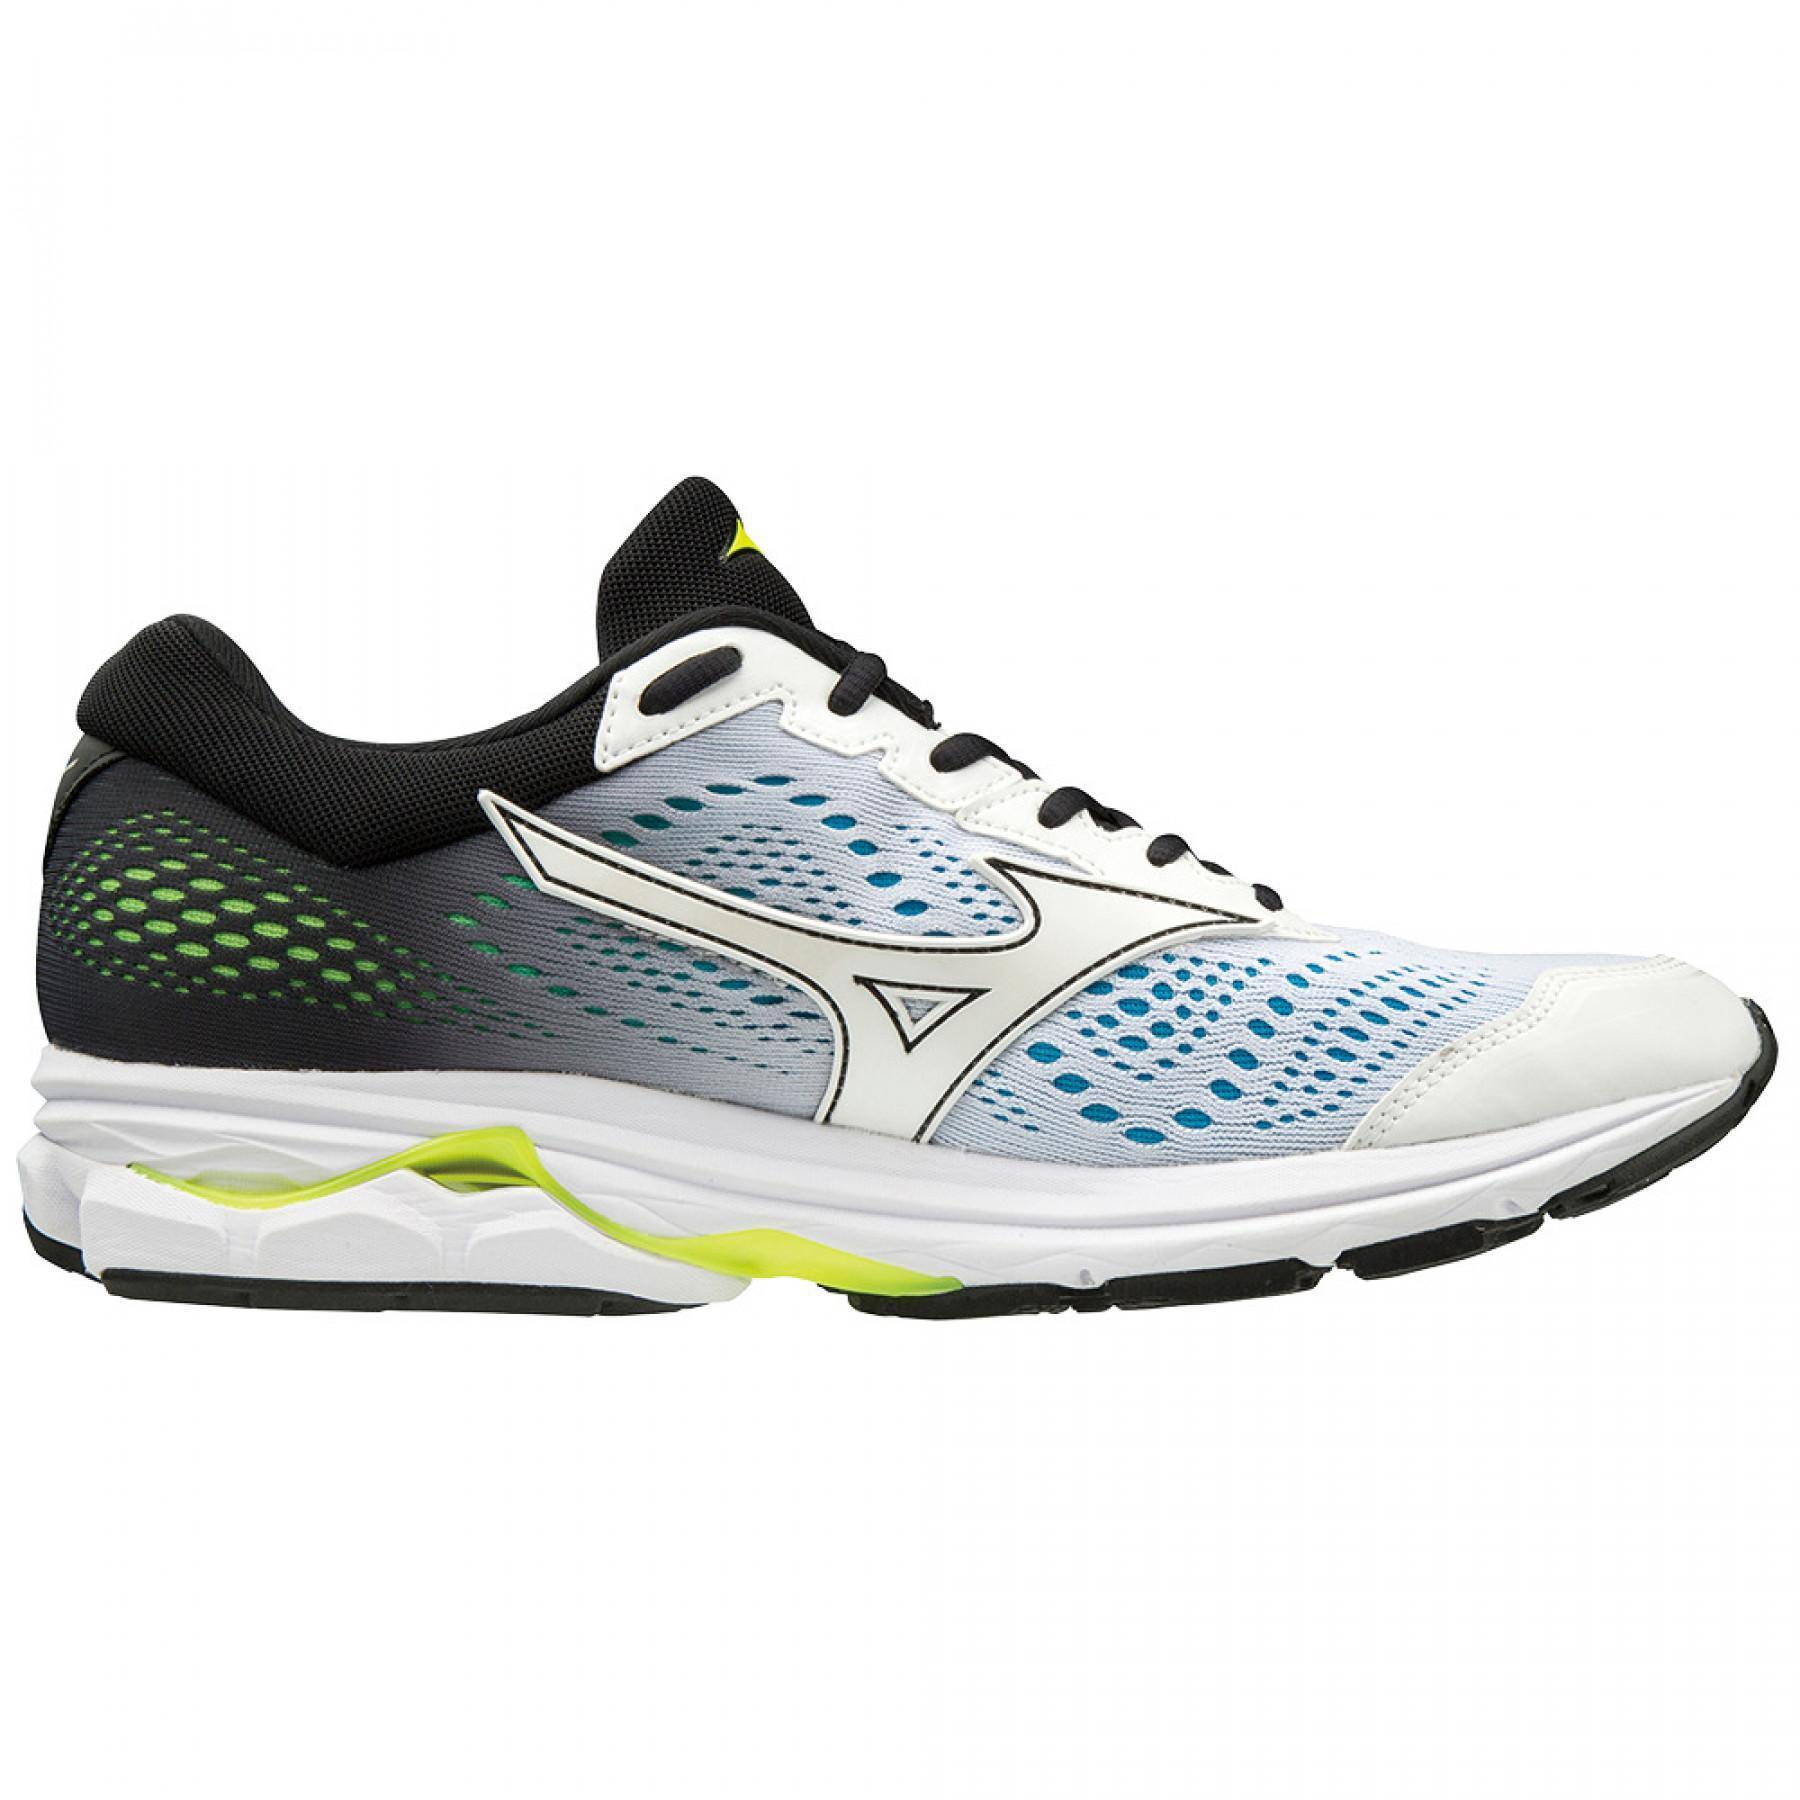 Chaussures Mizuno Wave rider 22 colorful